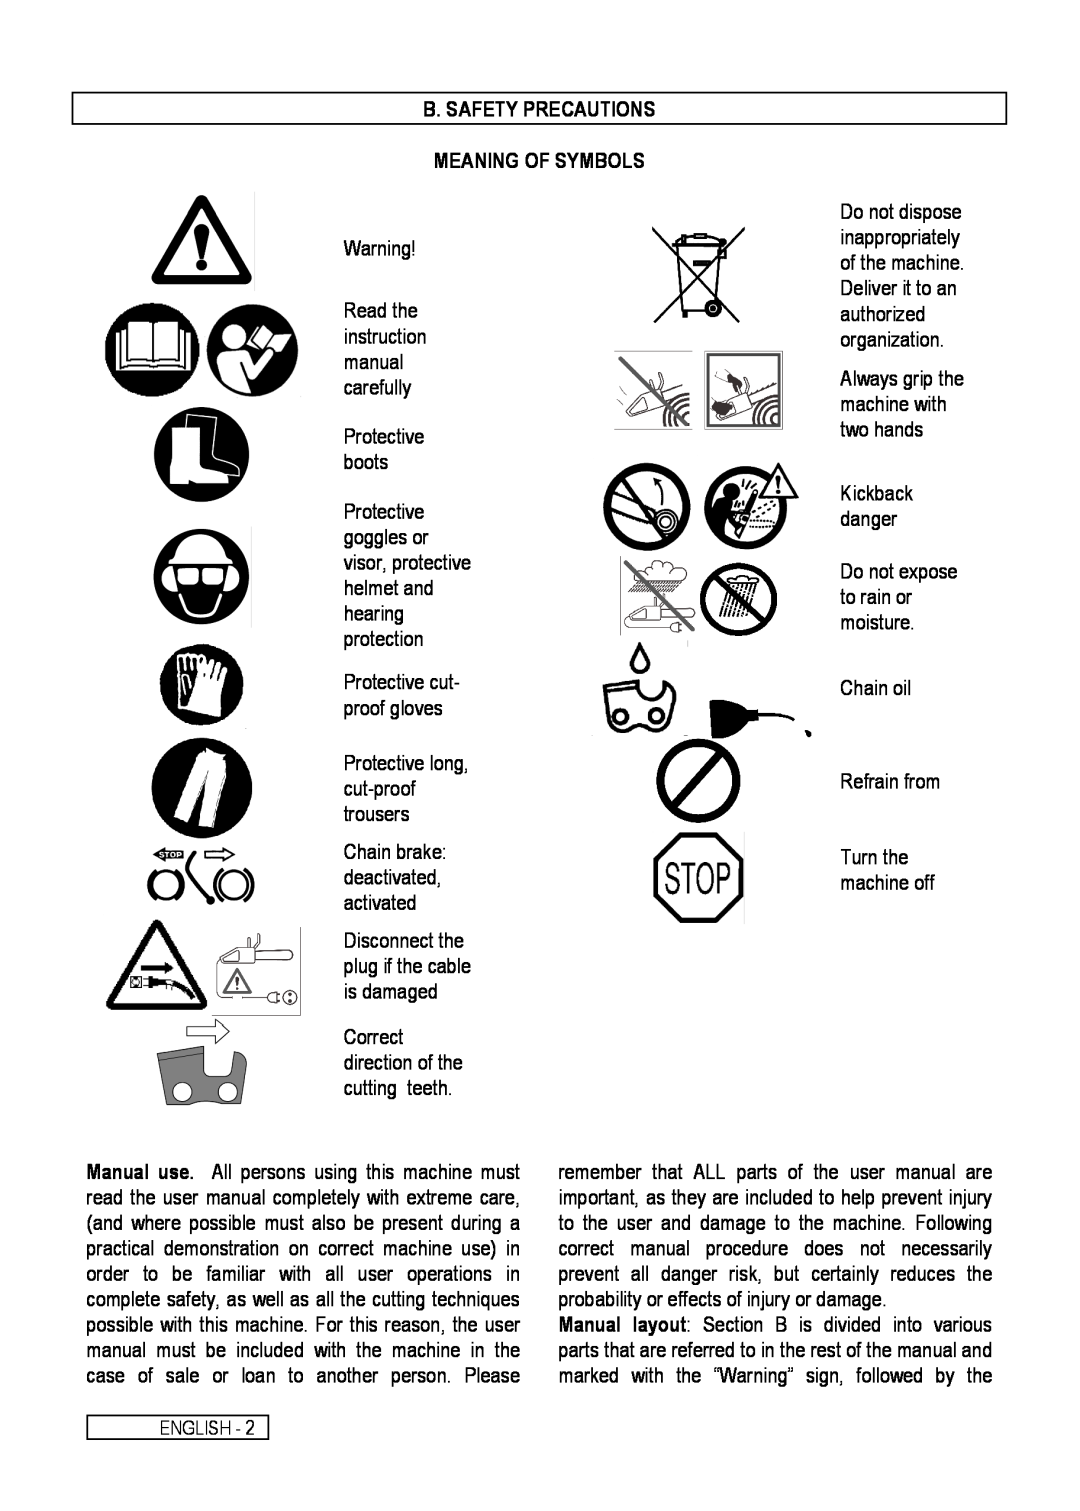 Electrolux Chain Saw manual B. Safety Precautions, Meaning Of Symbols, Do not expose 